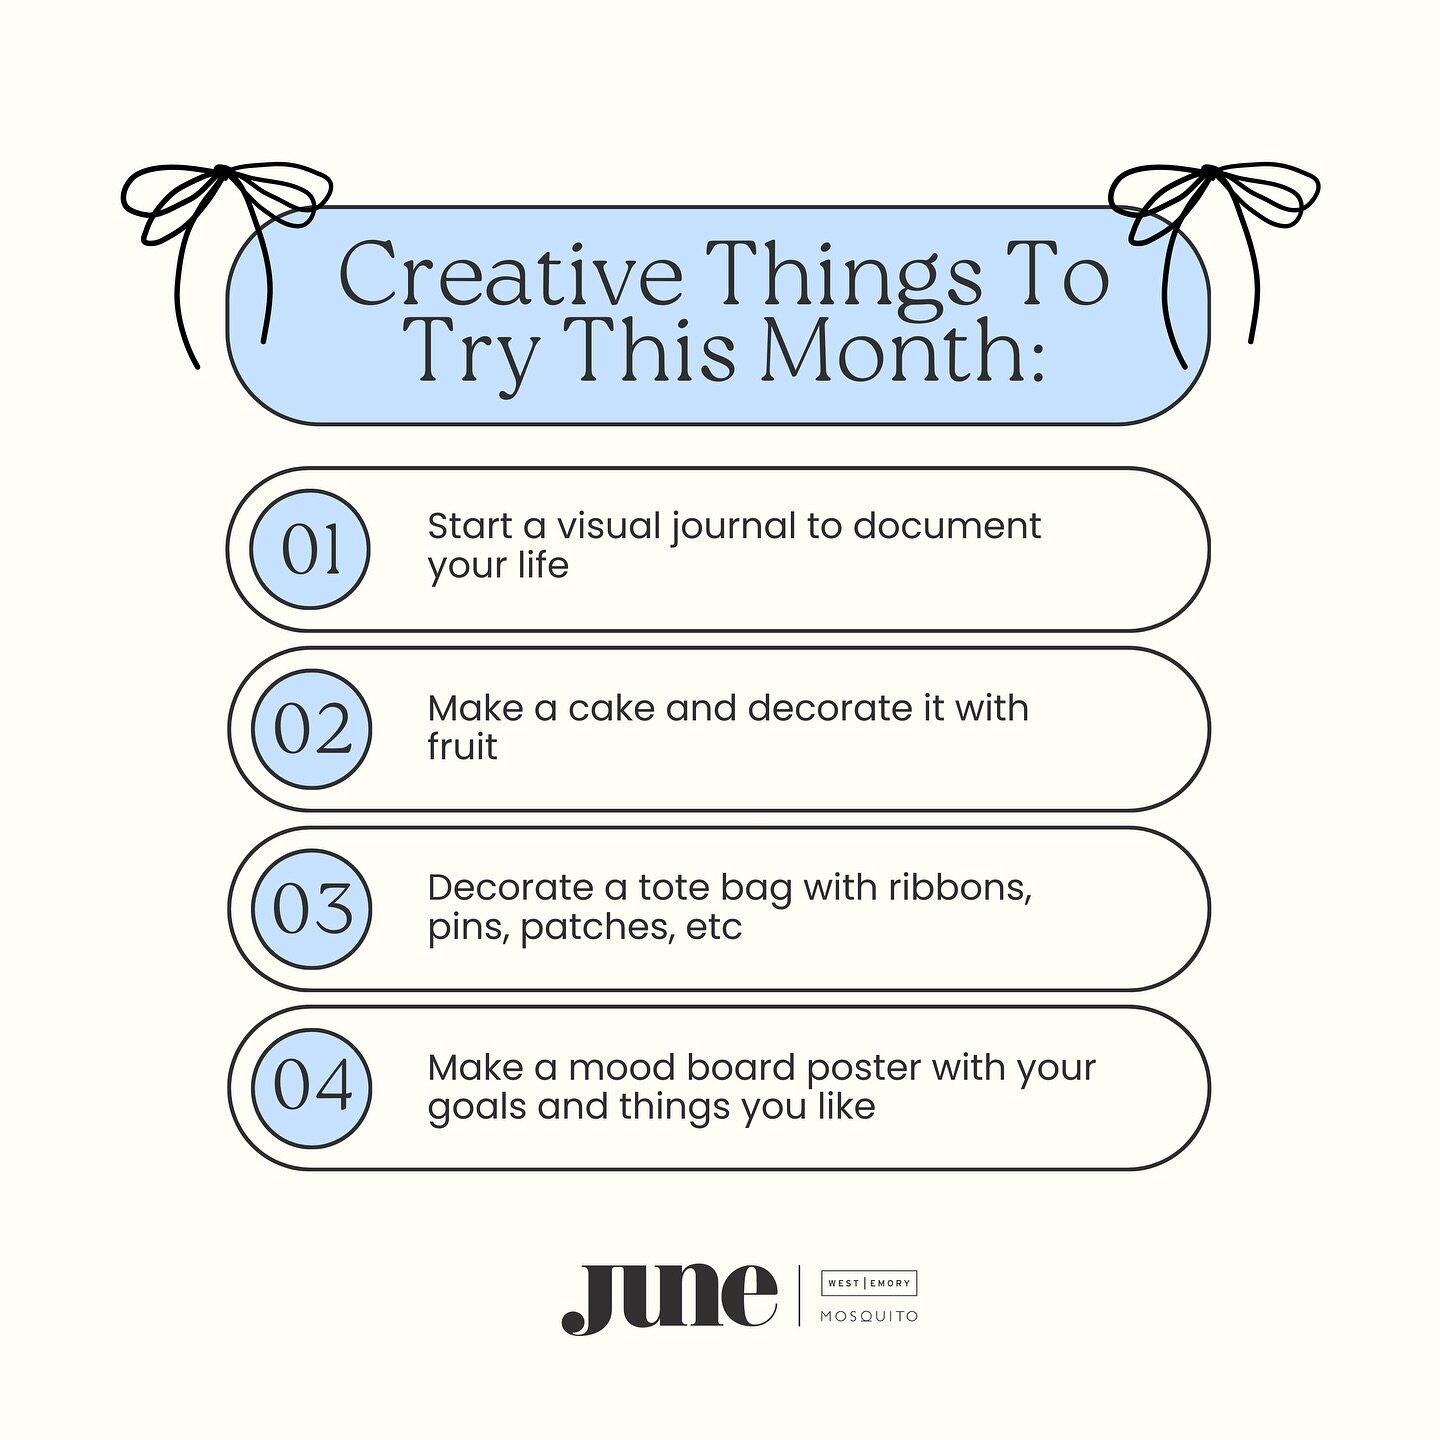 Stuck in a creative rut? Try out one of more of these ideas to get your creative juices flowing! We&rsquo;ve tagged some places where you can get supplies for each activity 🖤